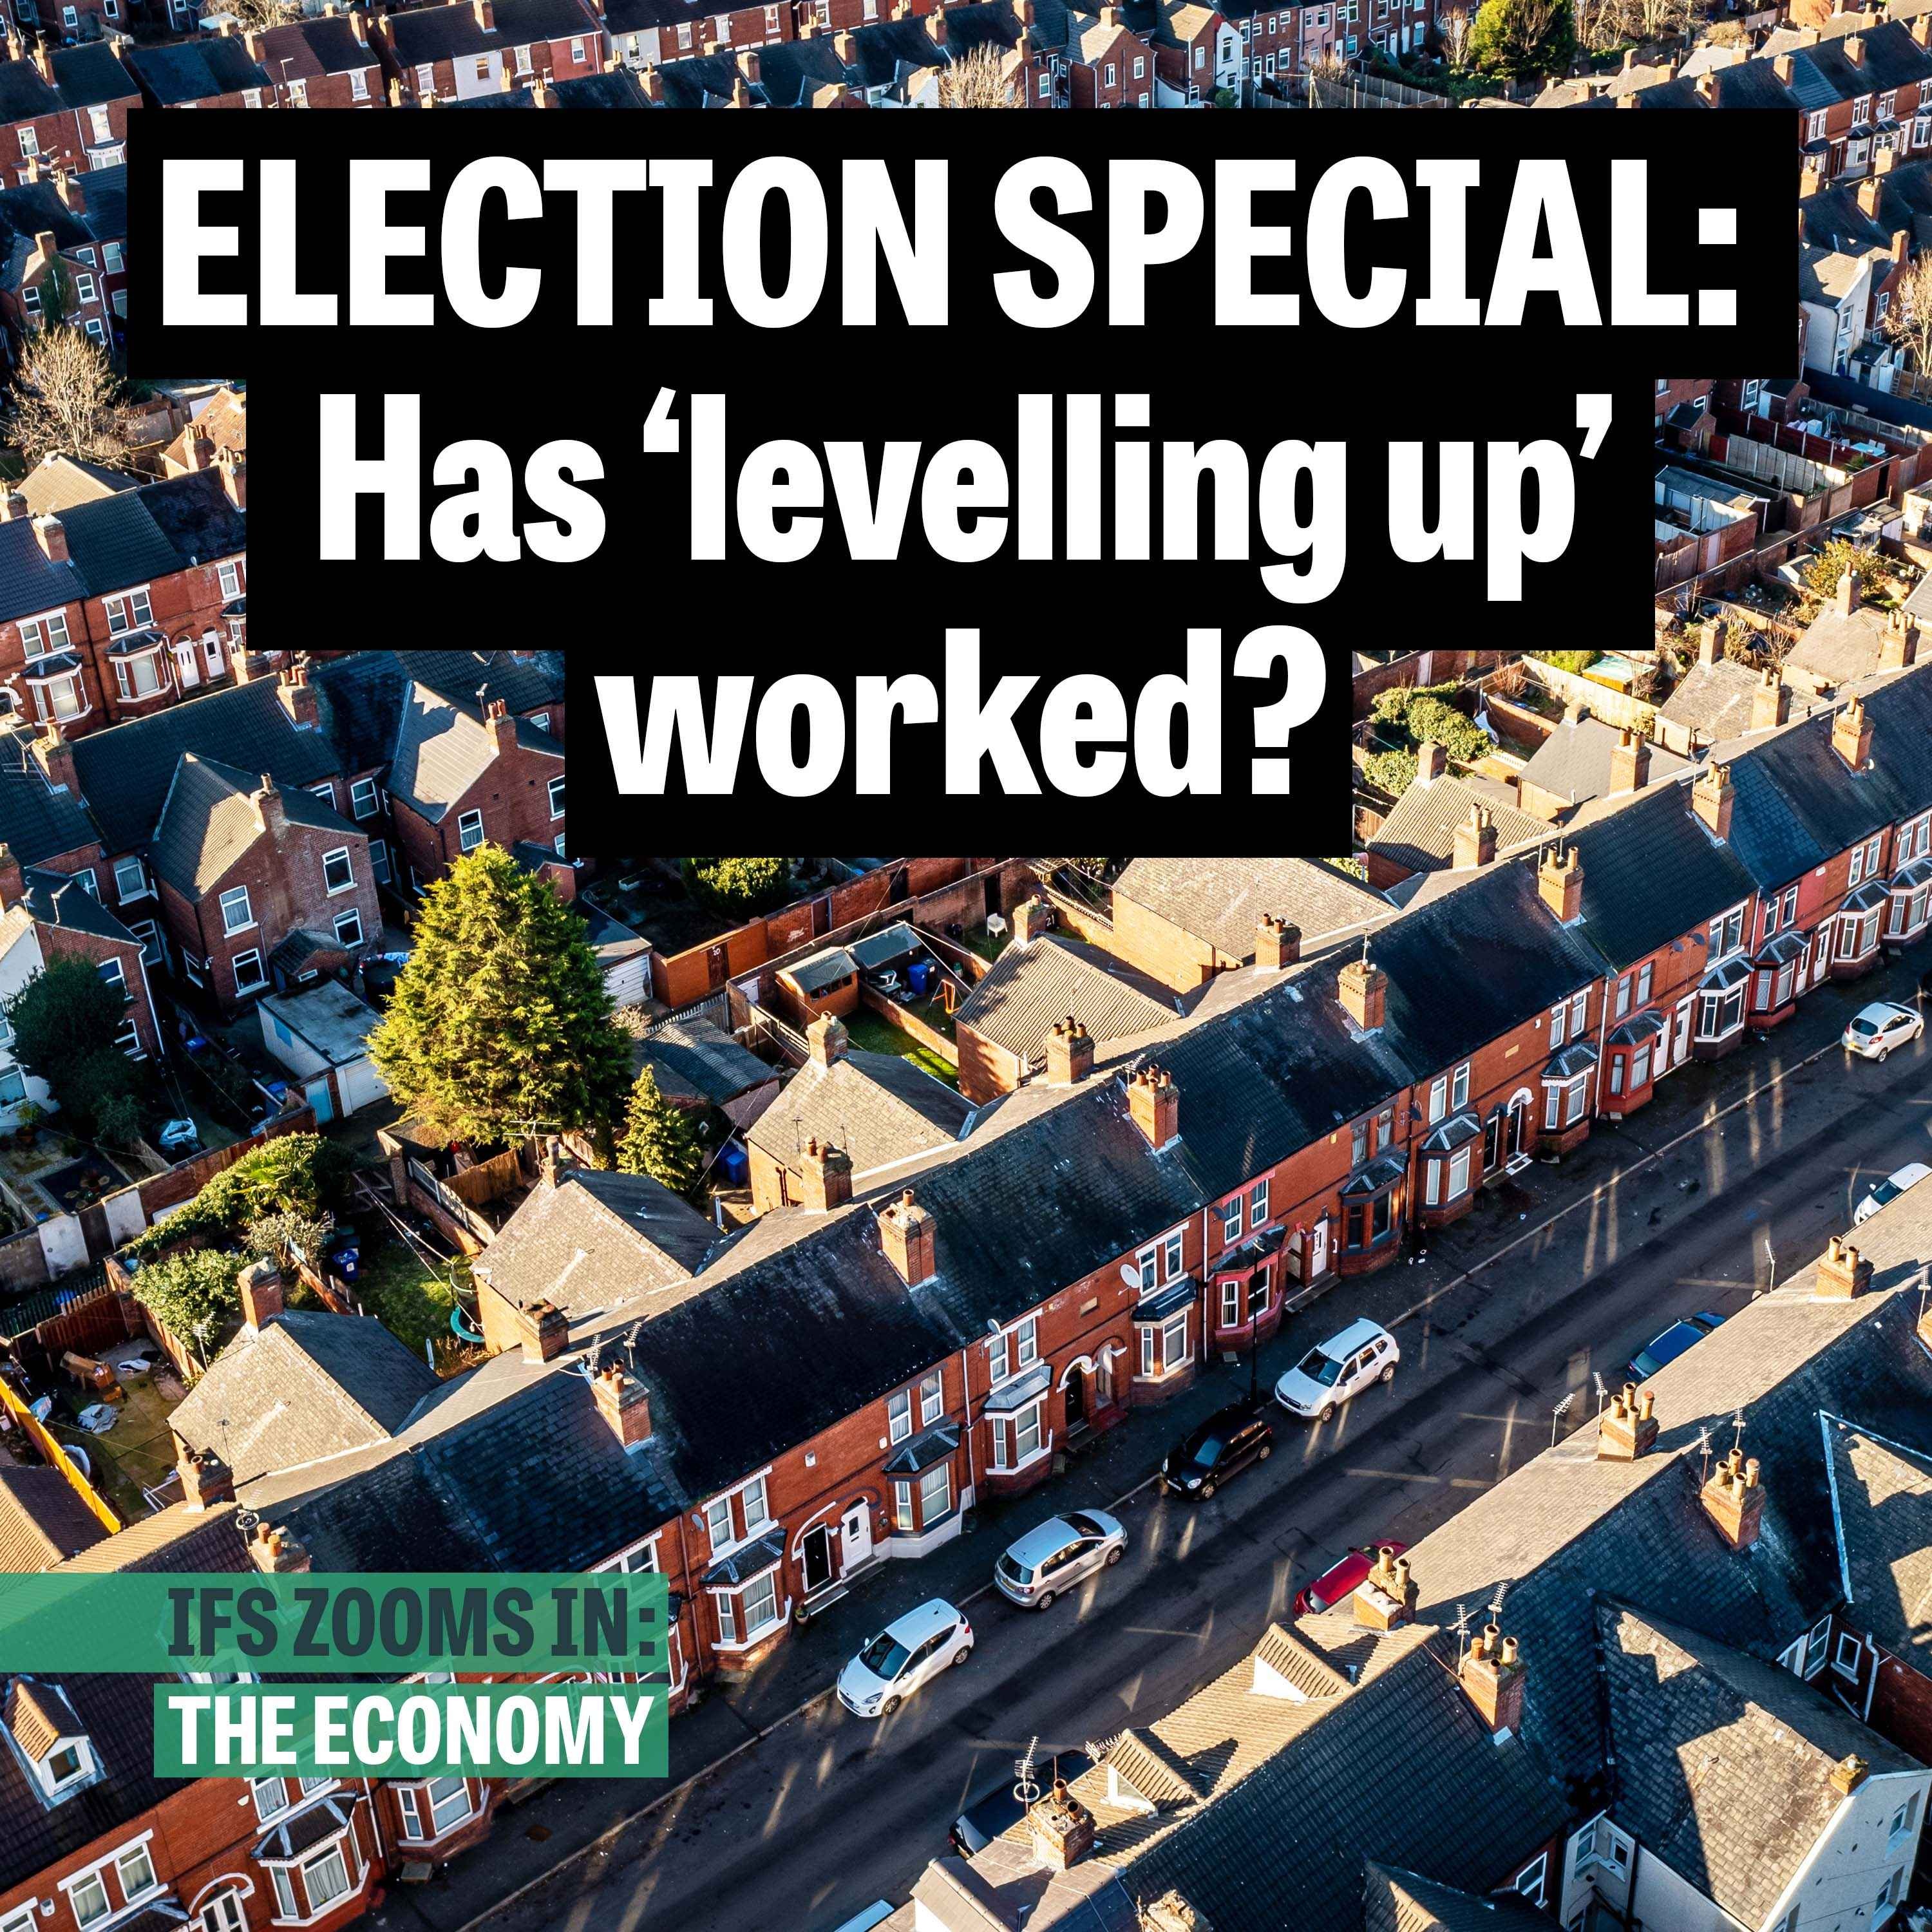 ELECTION SPECIAL: Has 'levelling up' worked?